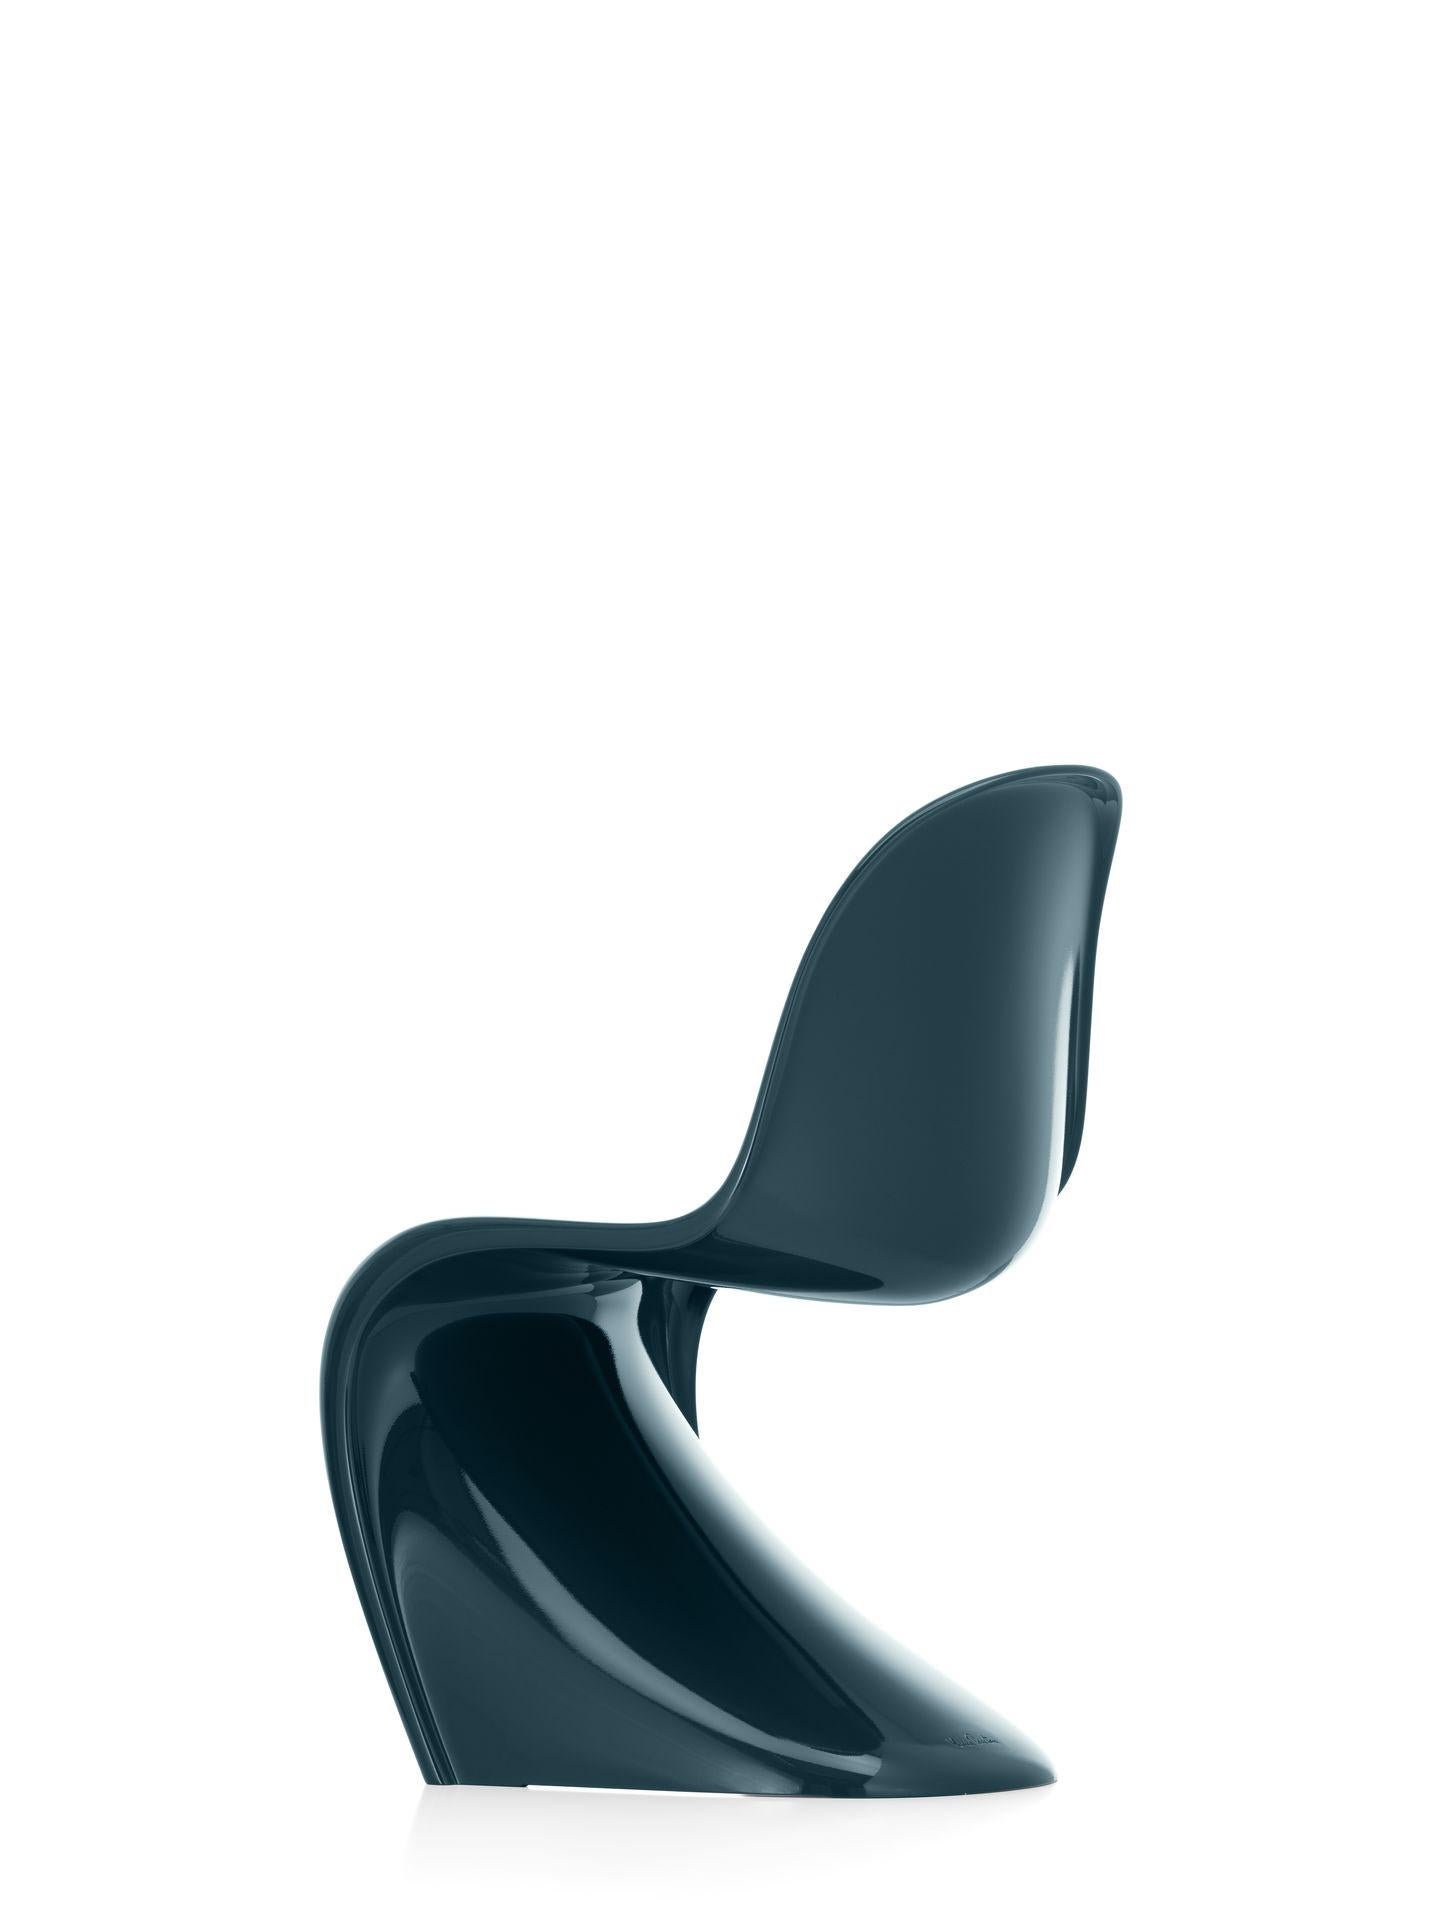 Vitra Panton Chair in Lacquered Petrol Blue by Verner Panton In New Condition For Sale In New York, NY